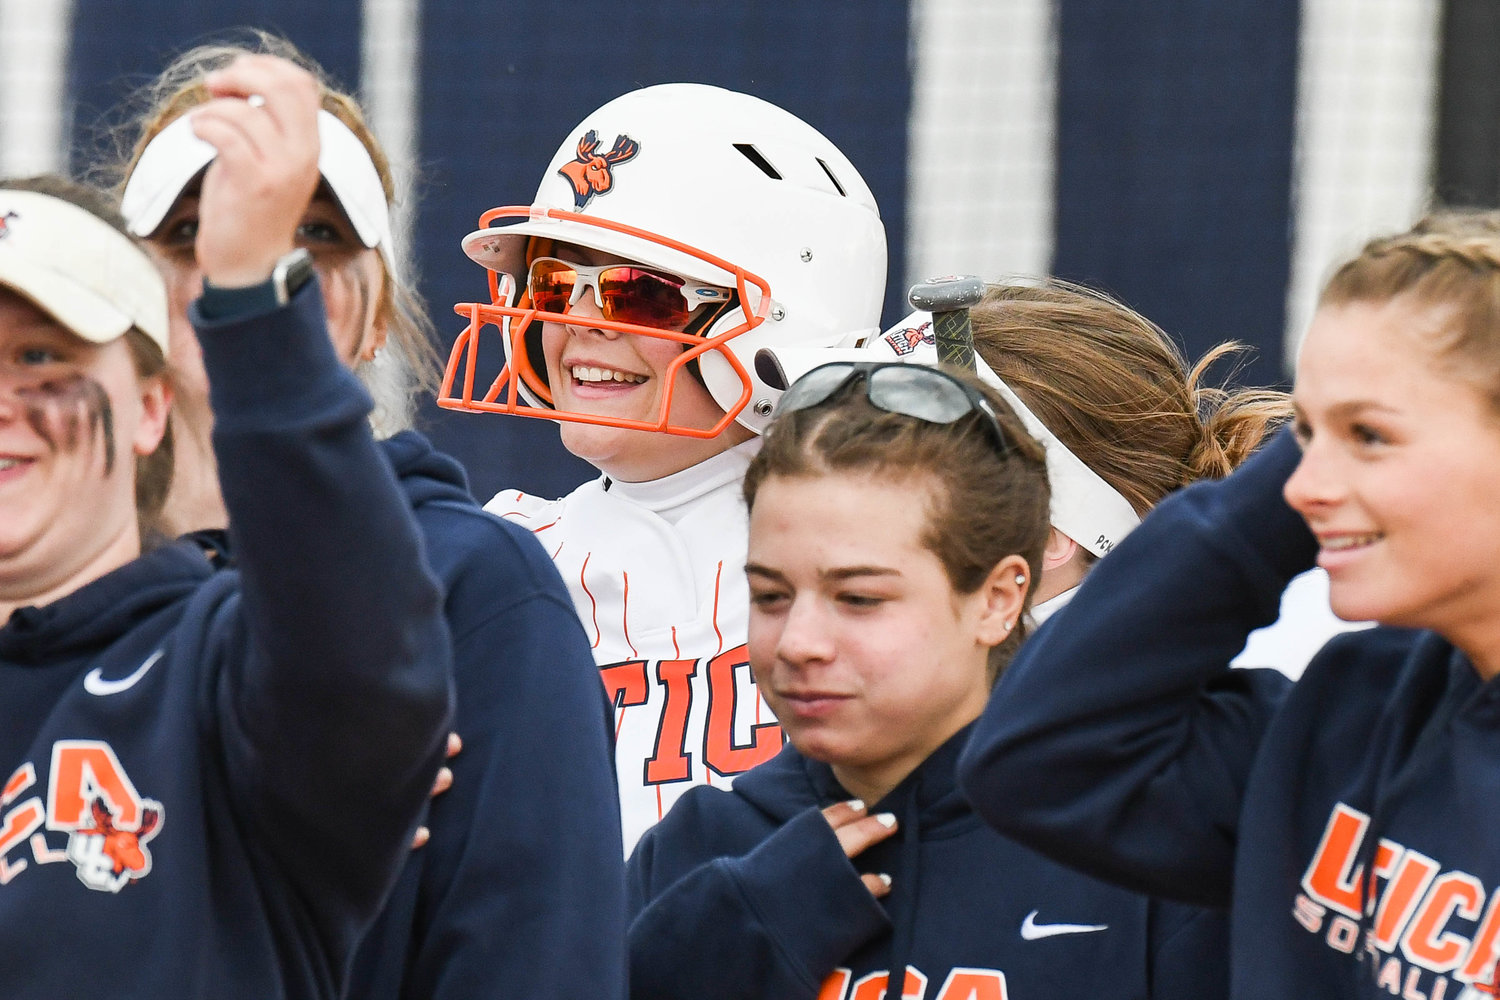 ALL SMILES — Utica University player Lauren Paul, center, smiles after hitting a home run during game two of a doubleheader against Russell Sage on Friday at Greenman Softball Field in Utica. The Pioneers split the twin bill with Russell Sage winning game two, 12-7. The Pioneers, who are 11-15 overall, lost game one, 2-1.